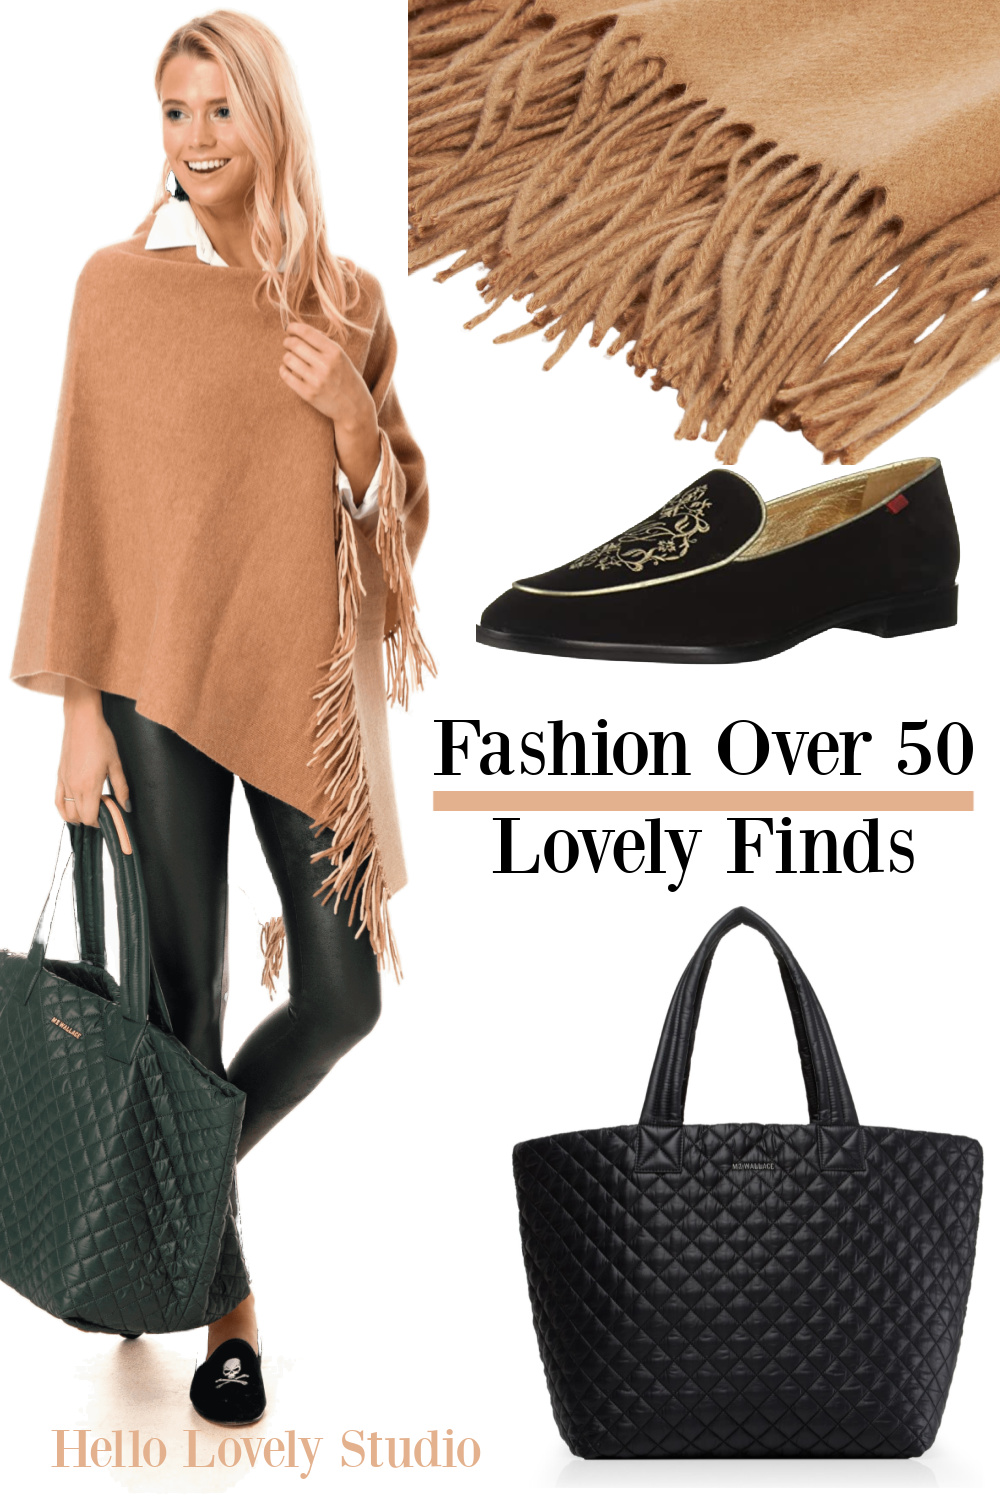 Fashion Over 50 Lovely Finds for Winter - Hello Lovely Studio. #fashionover50 #over50fashion